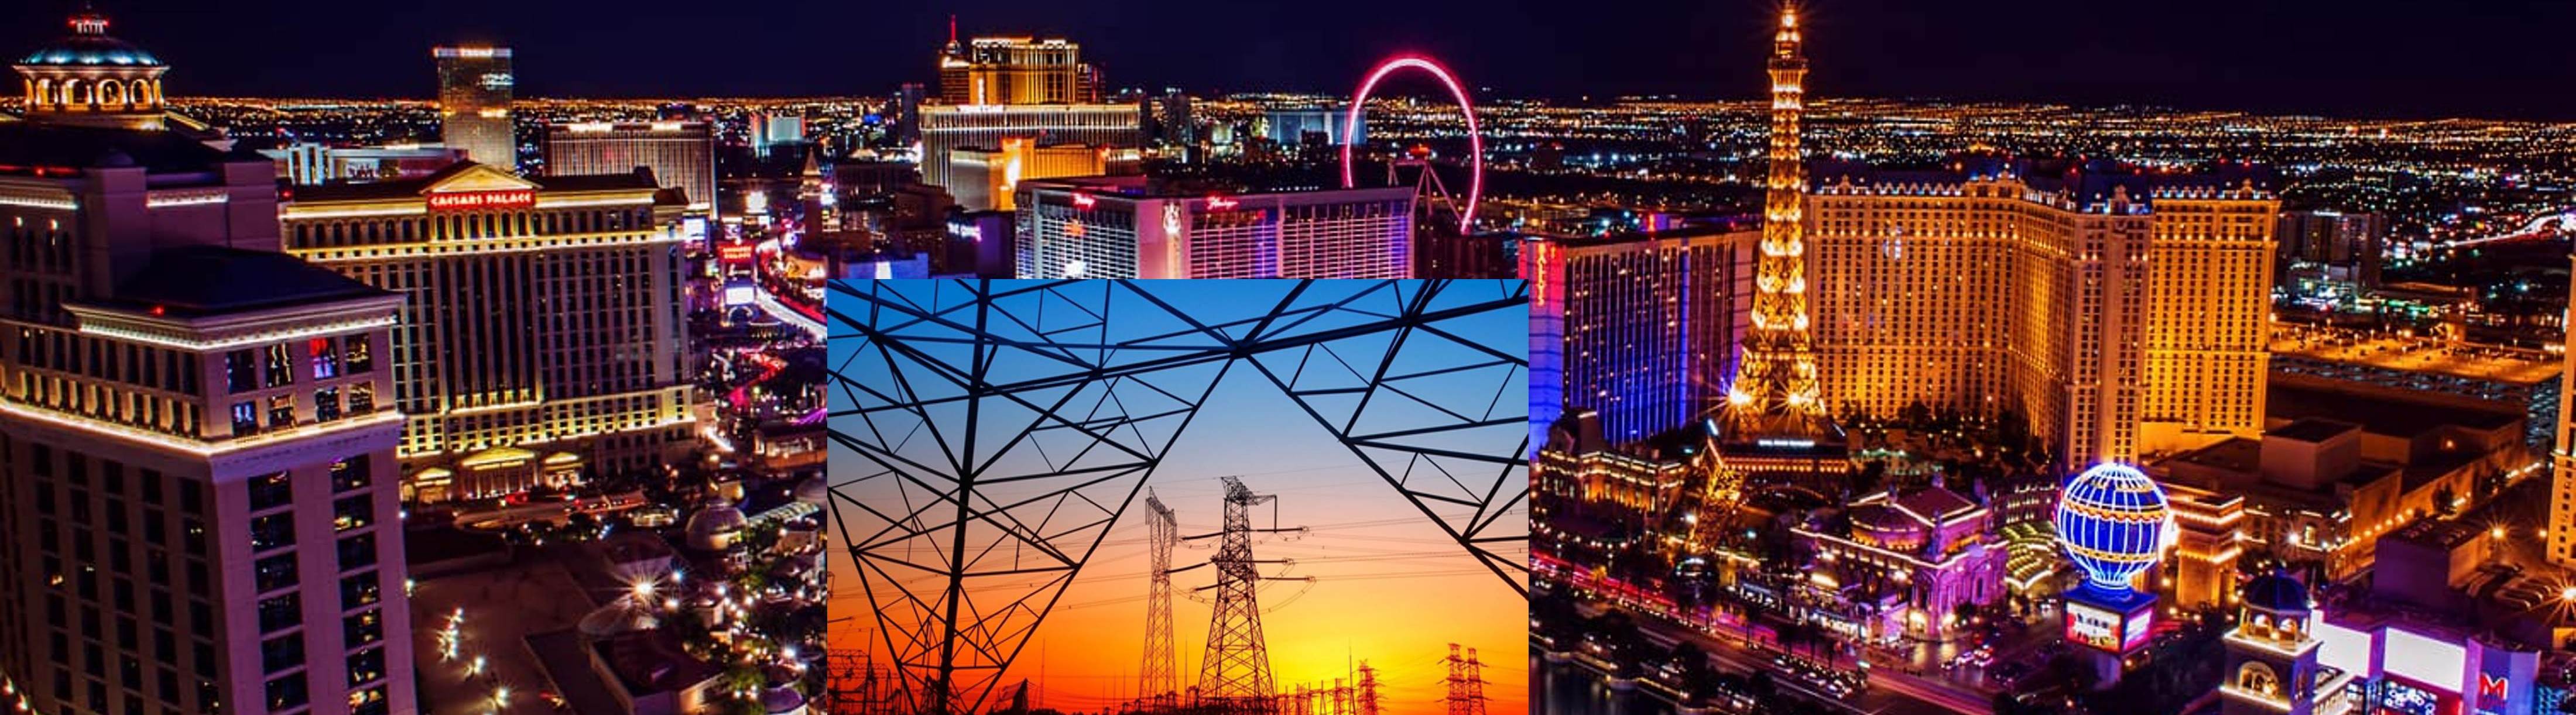 Electrical Engineering Principles & Practice for Non-EE's (8-PDH); Live, In-person, in Las Vegas, Sept. 18th, 2023, 8:15 AM - 5:00 PM (PT)